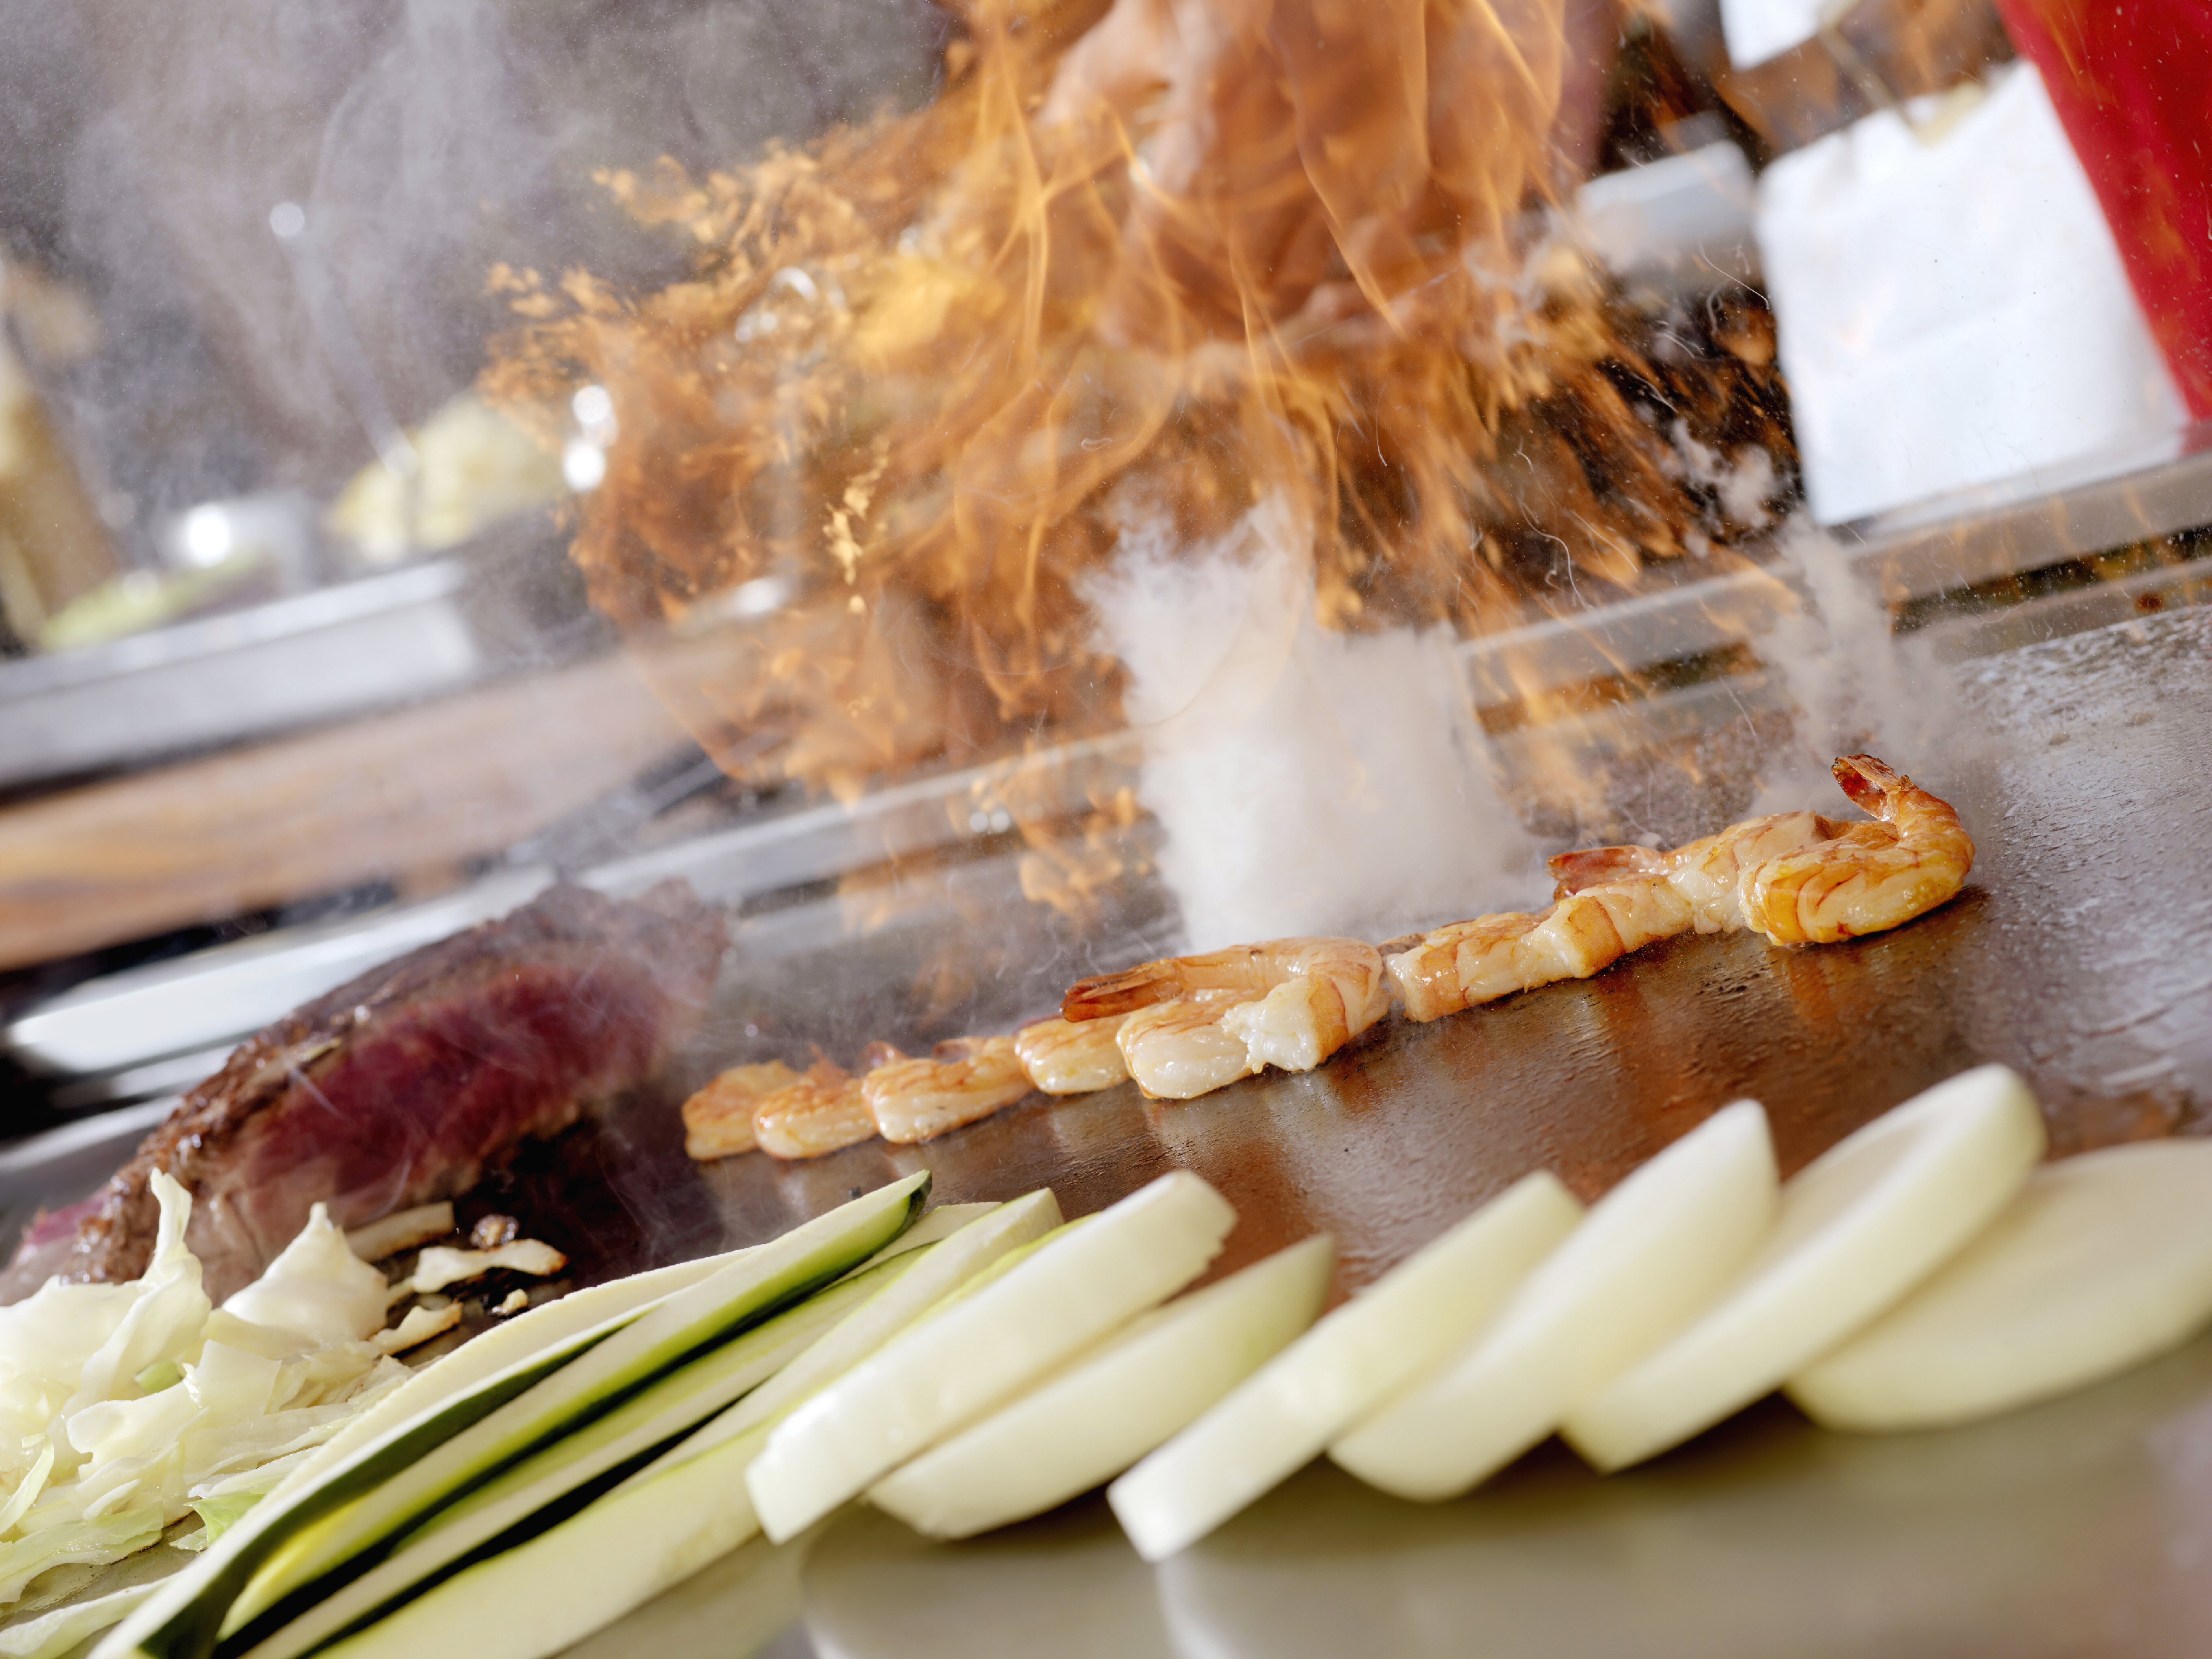 Shrimp and vegetables being cooked on a teppanyaki grill with flames and steam rising in the background